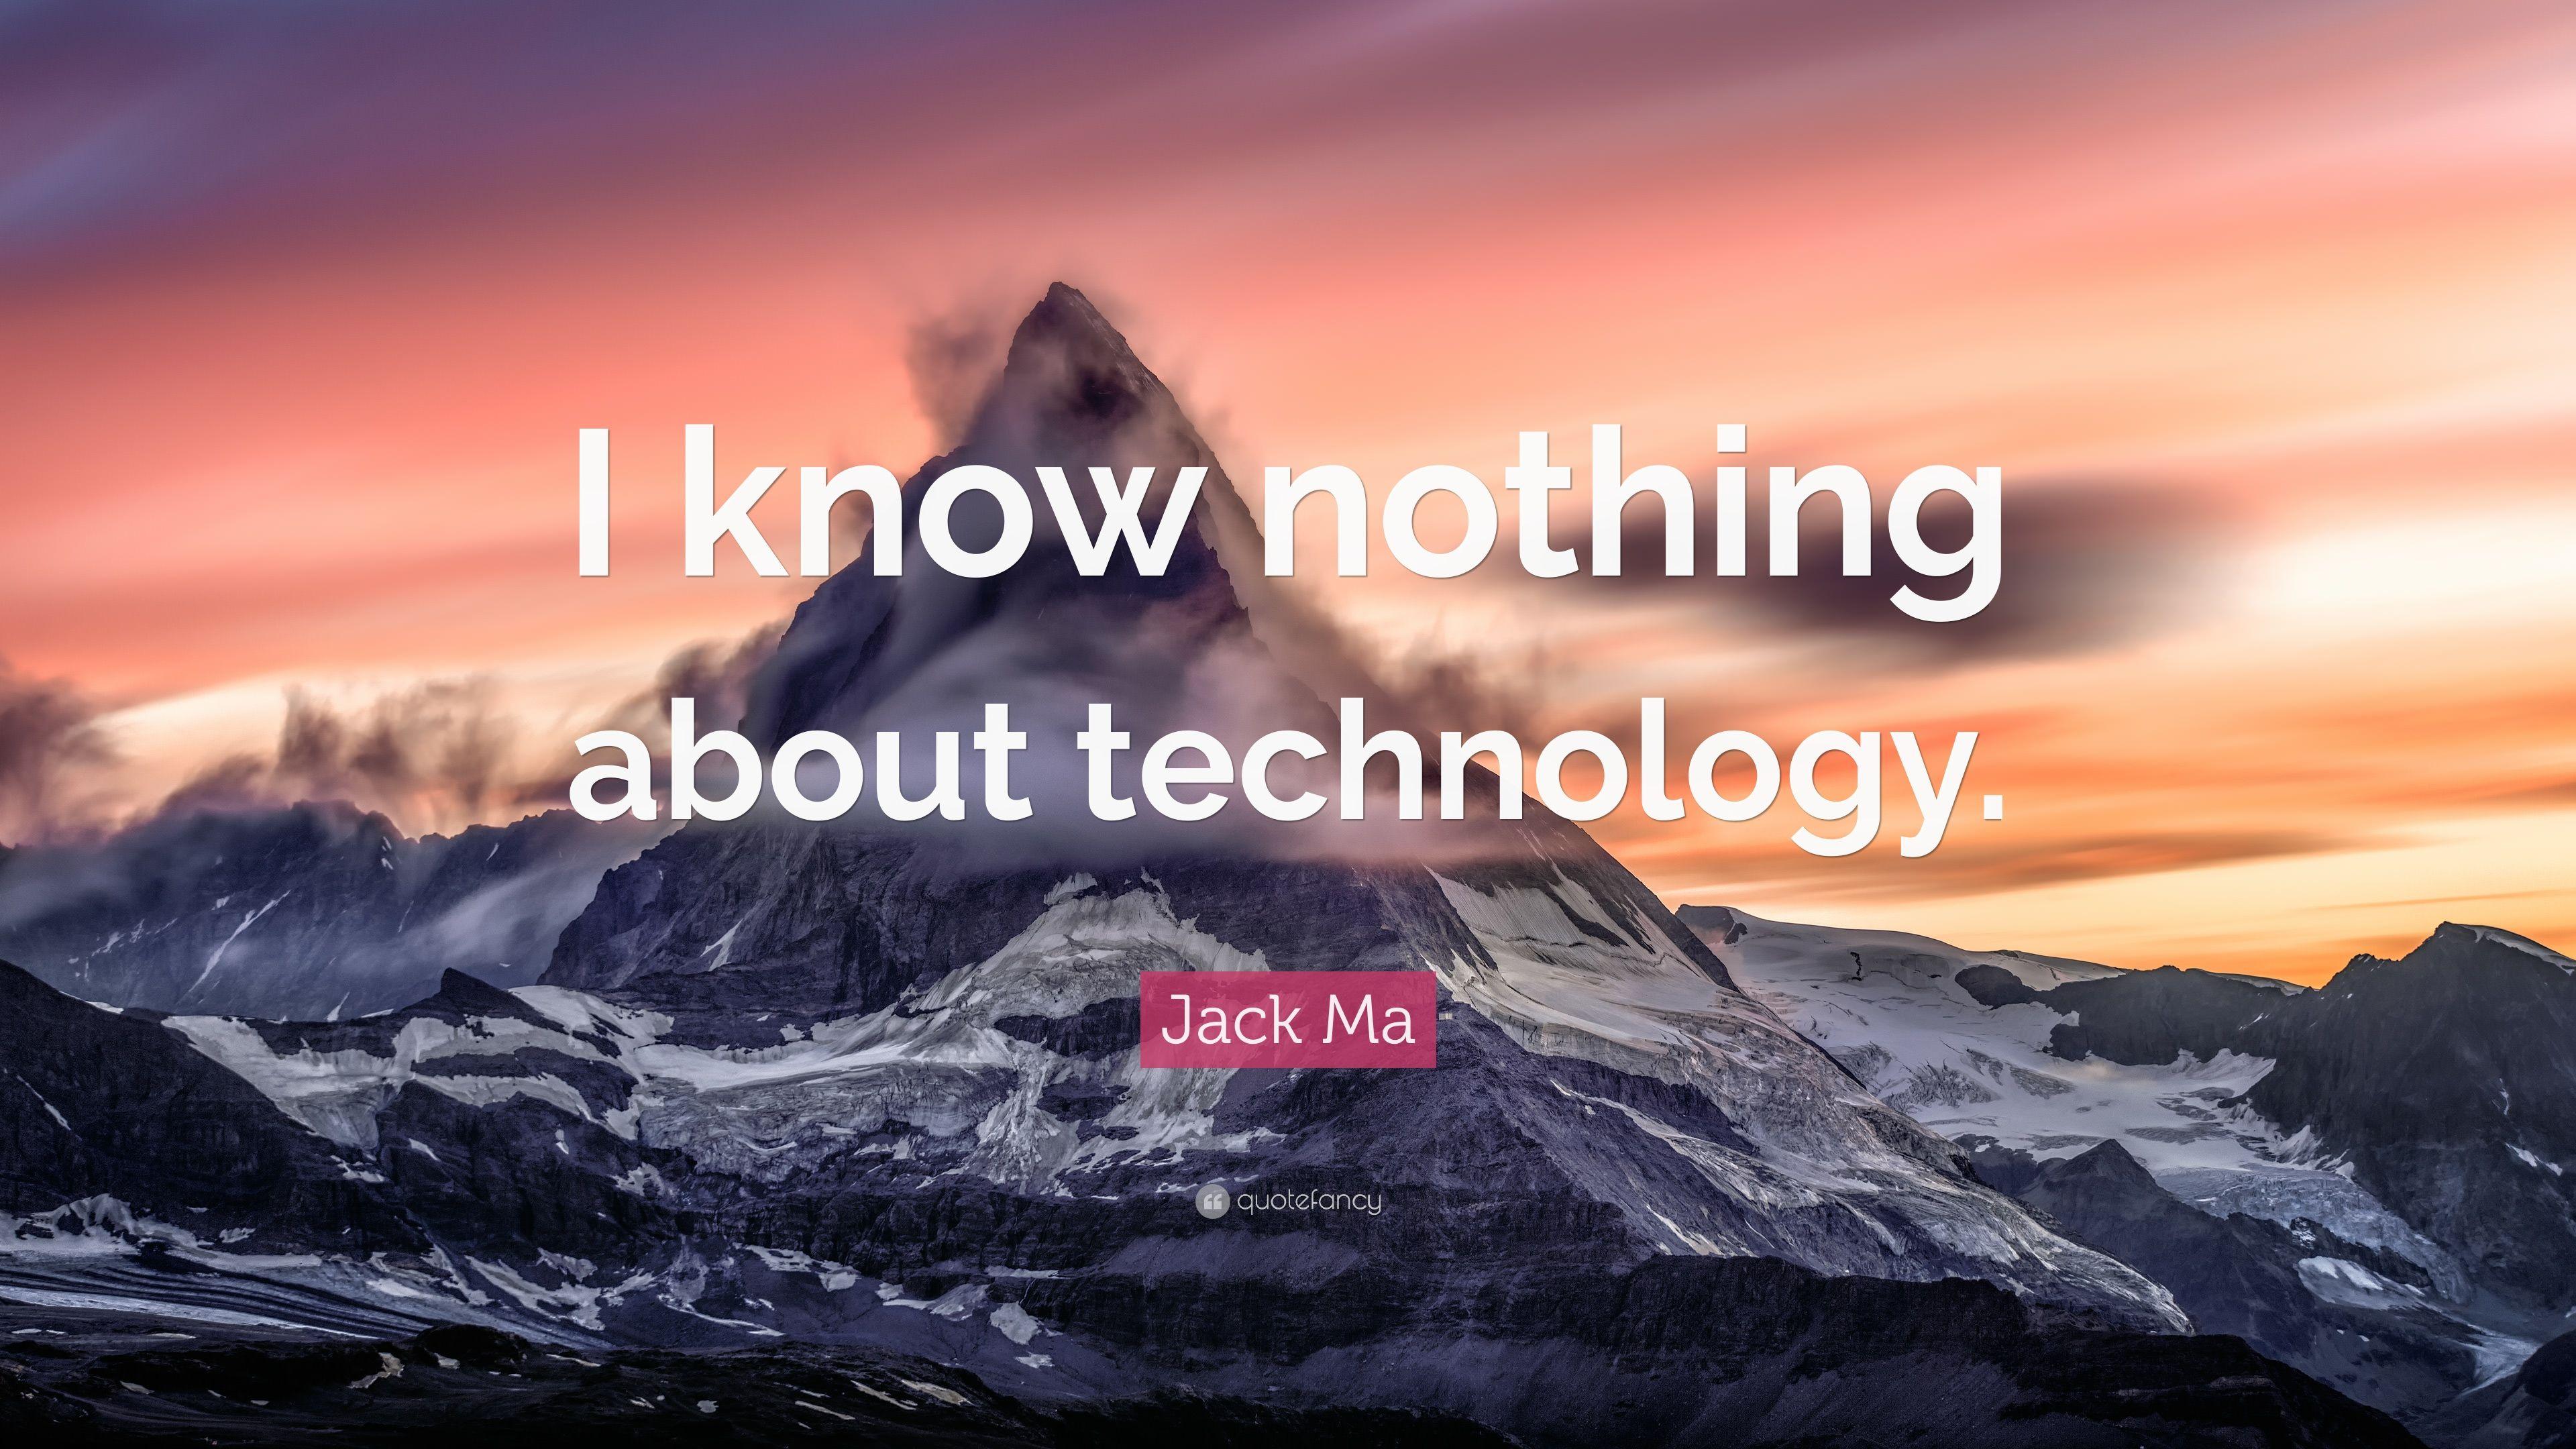 Jack Ma Quote: “I know nothing about technology.” 10 wallpaper